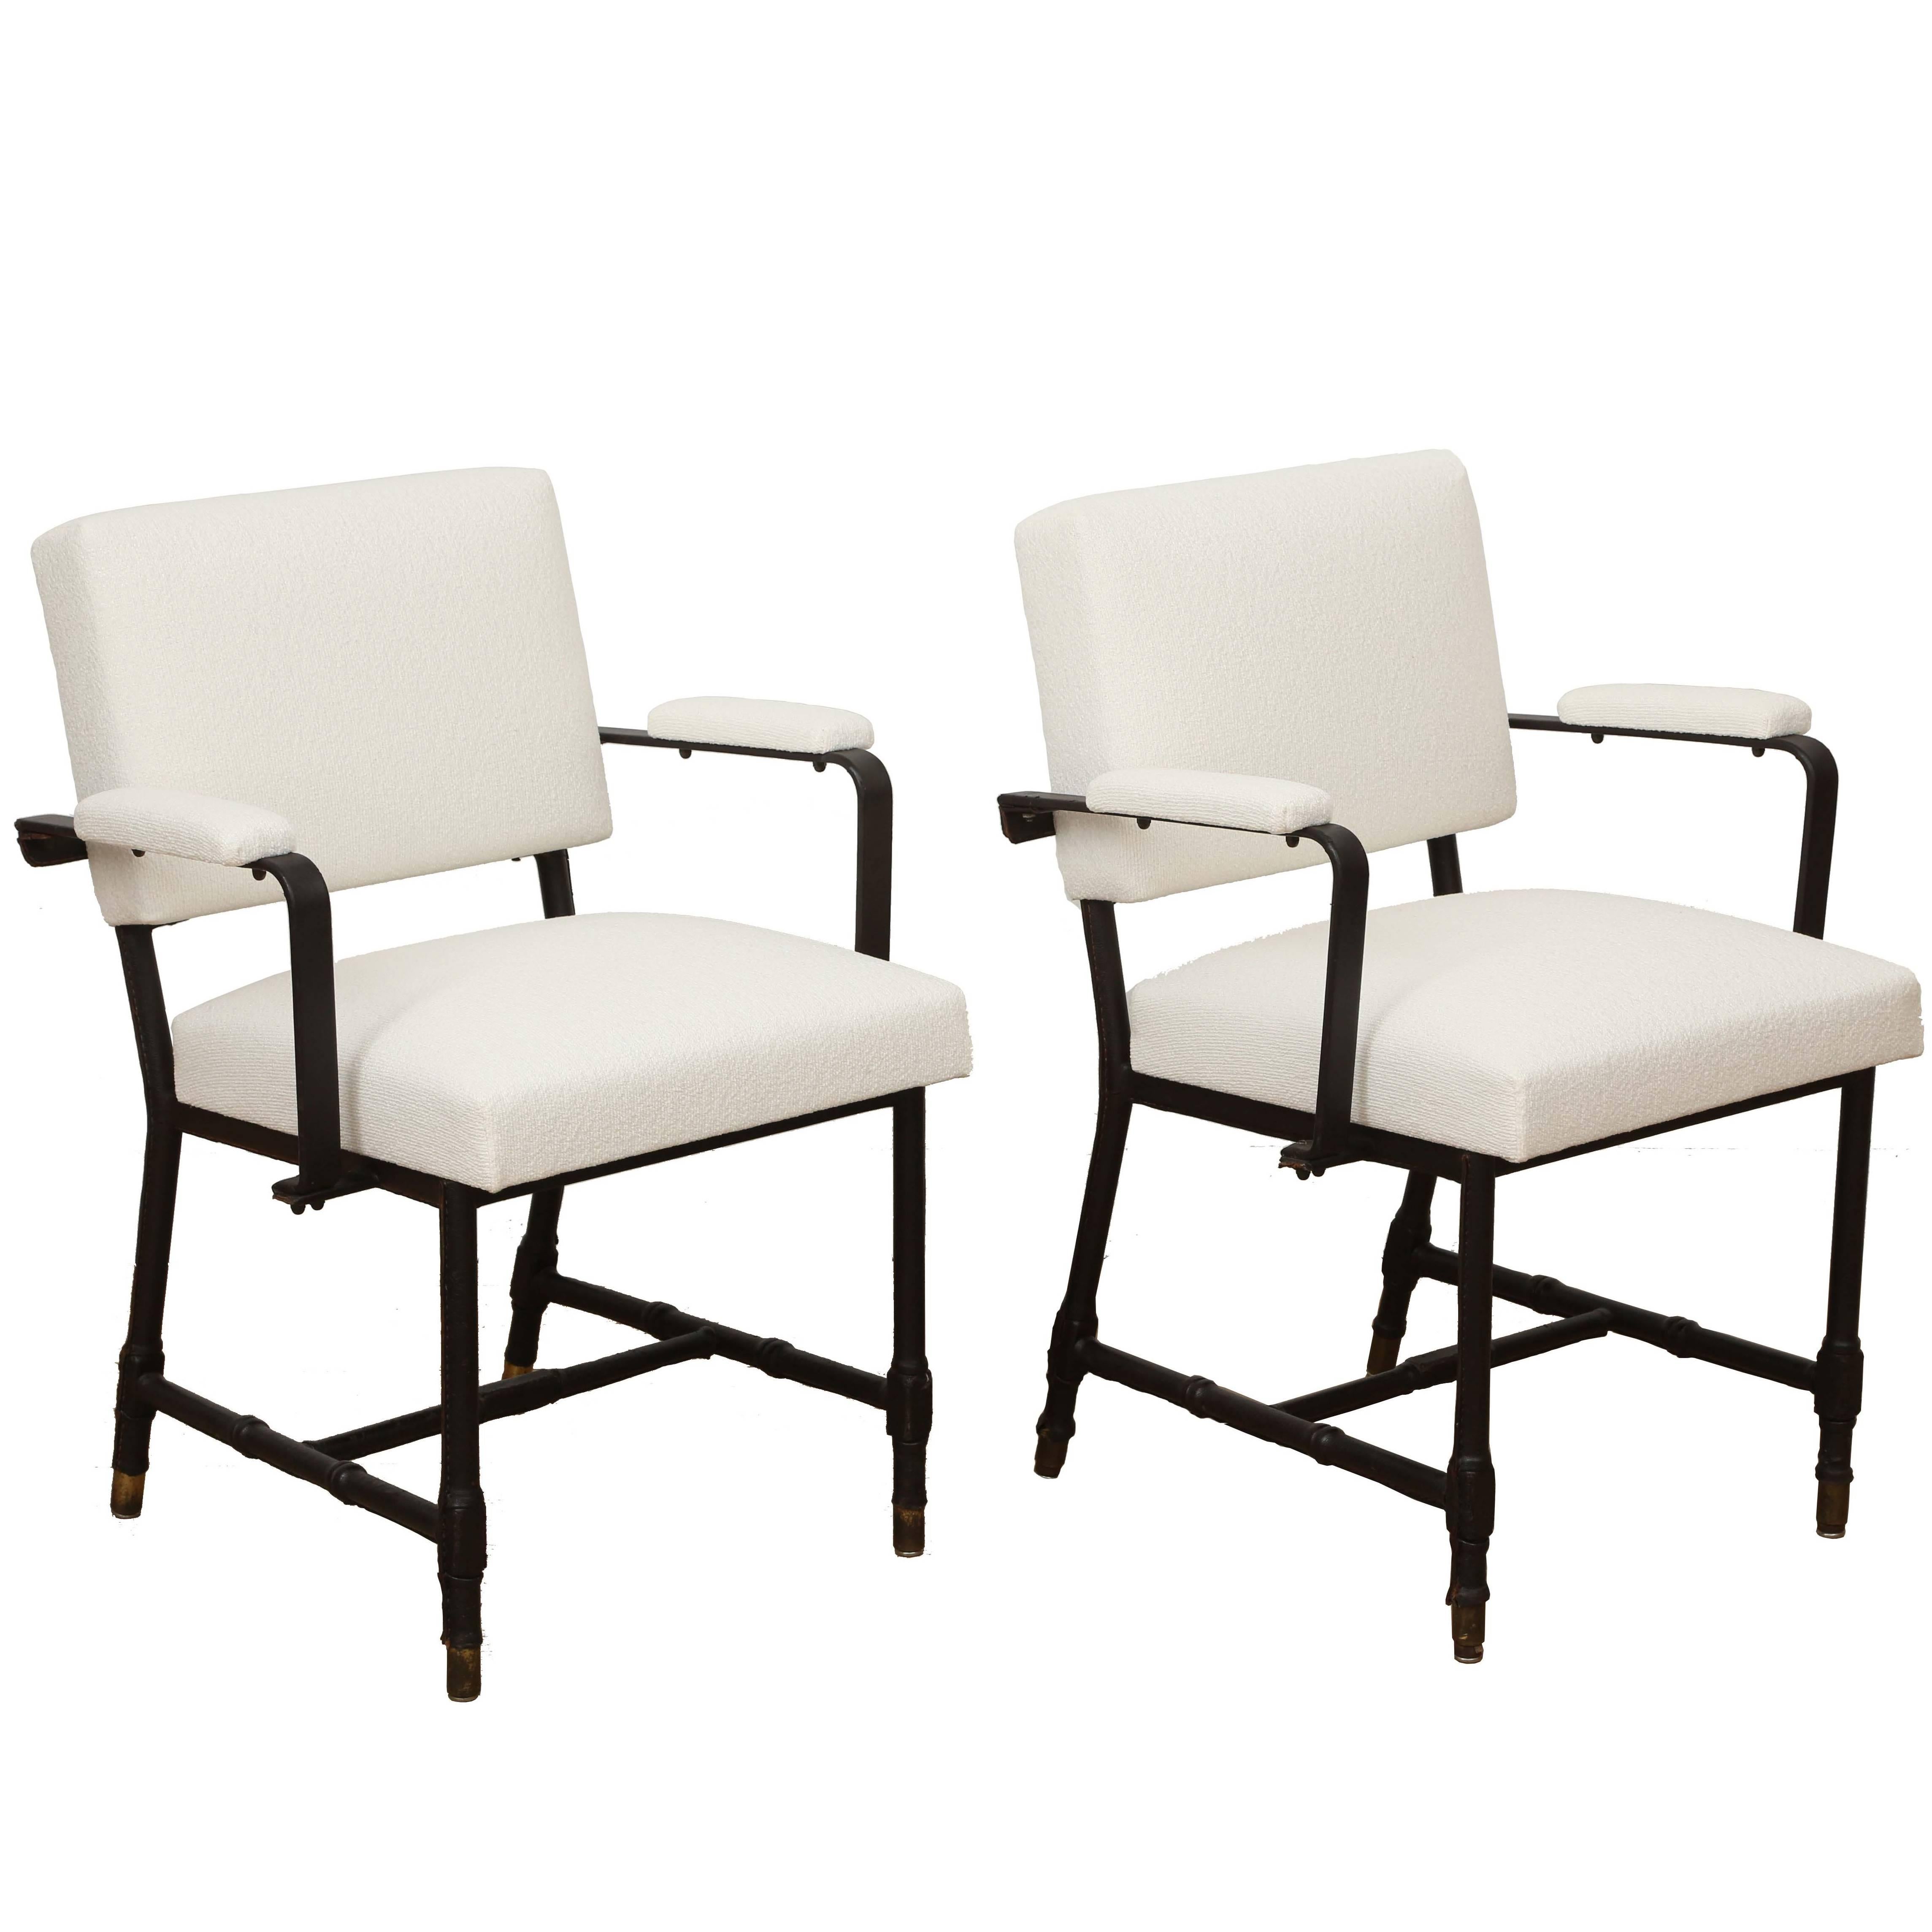 Pair of Hand-Stitched Leather Armchairs by Jacques Adnet